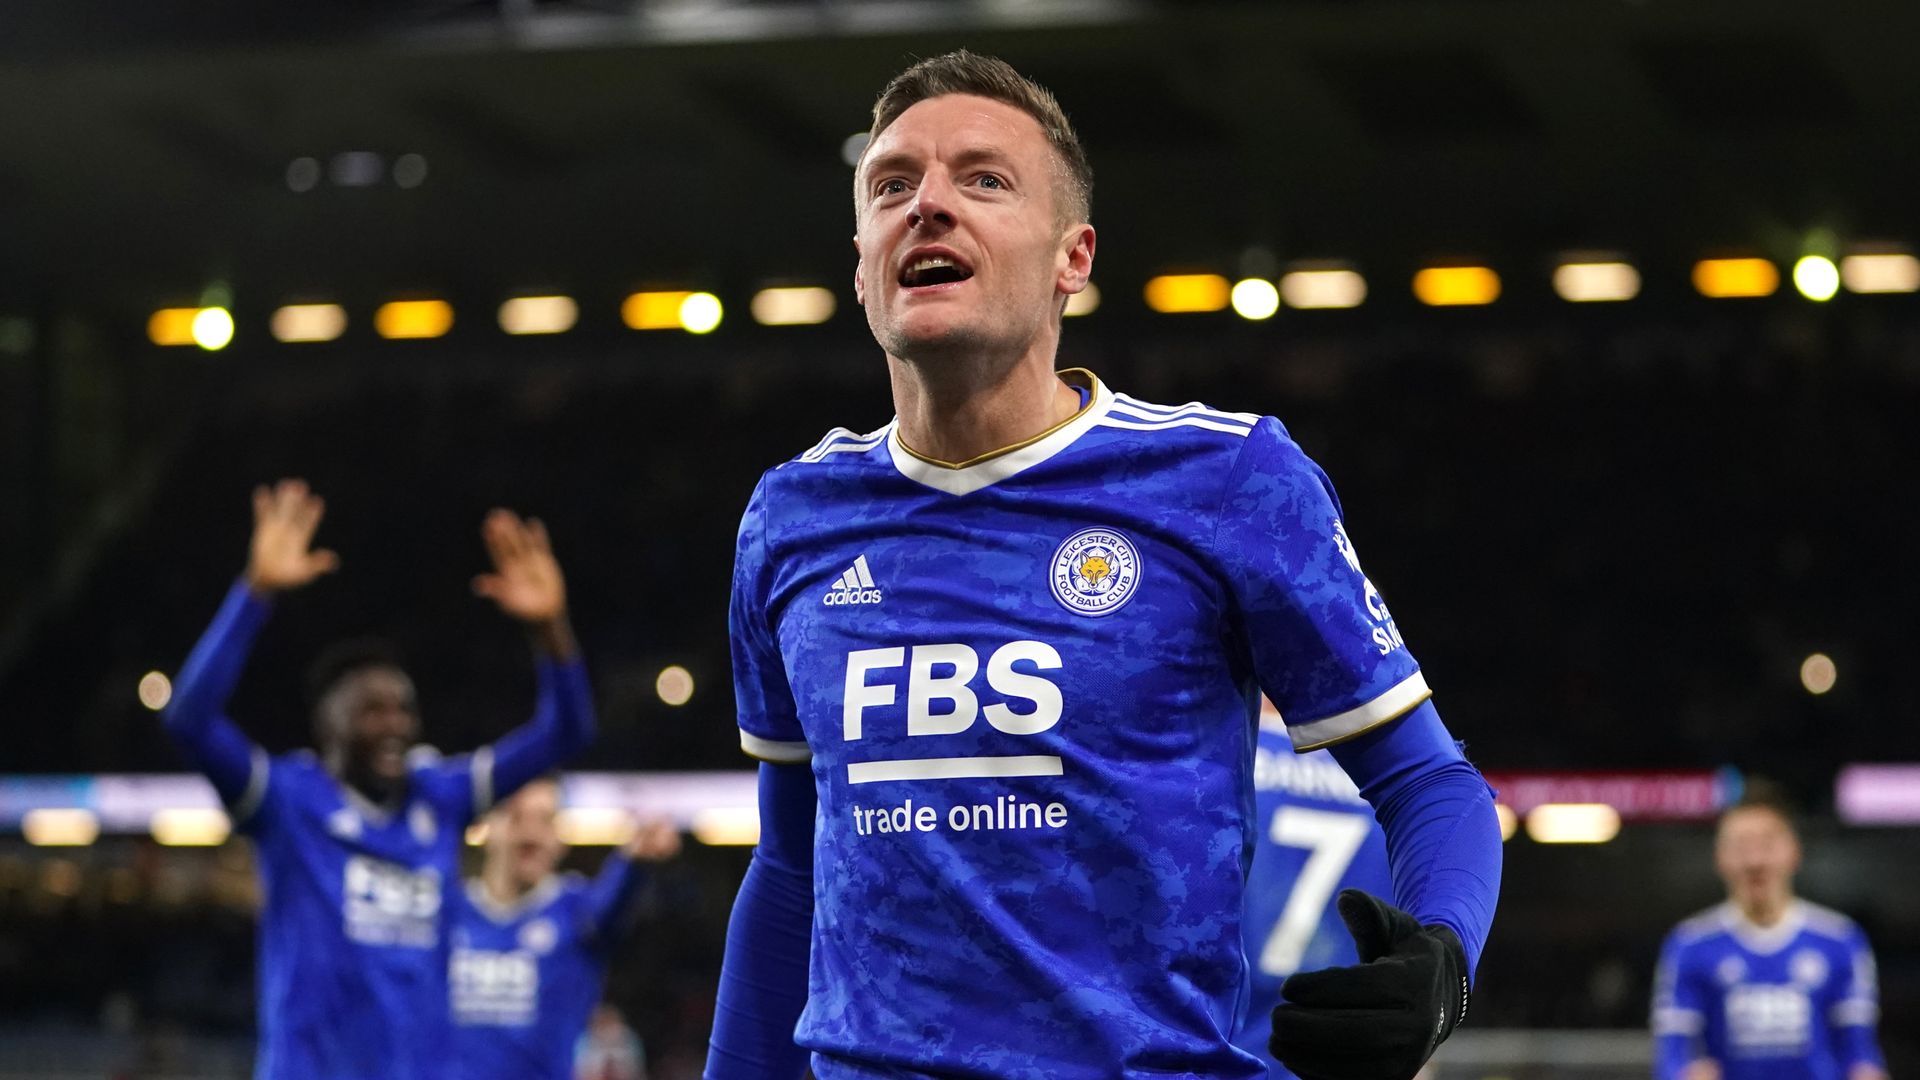 Burnley 0-2 Leicester: James Maddison and Jamie Vardy score off the bench as Foxes keep Clarets in bottom three